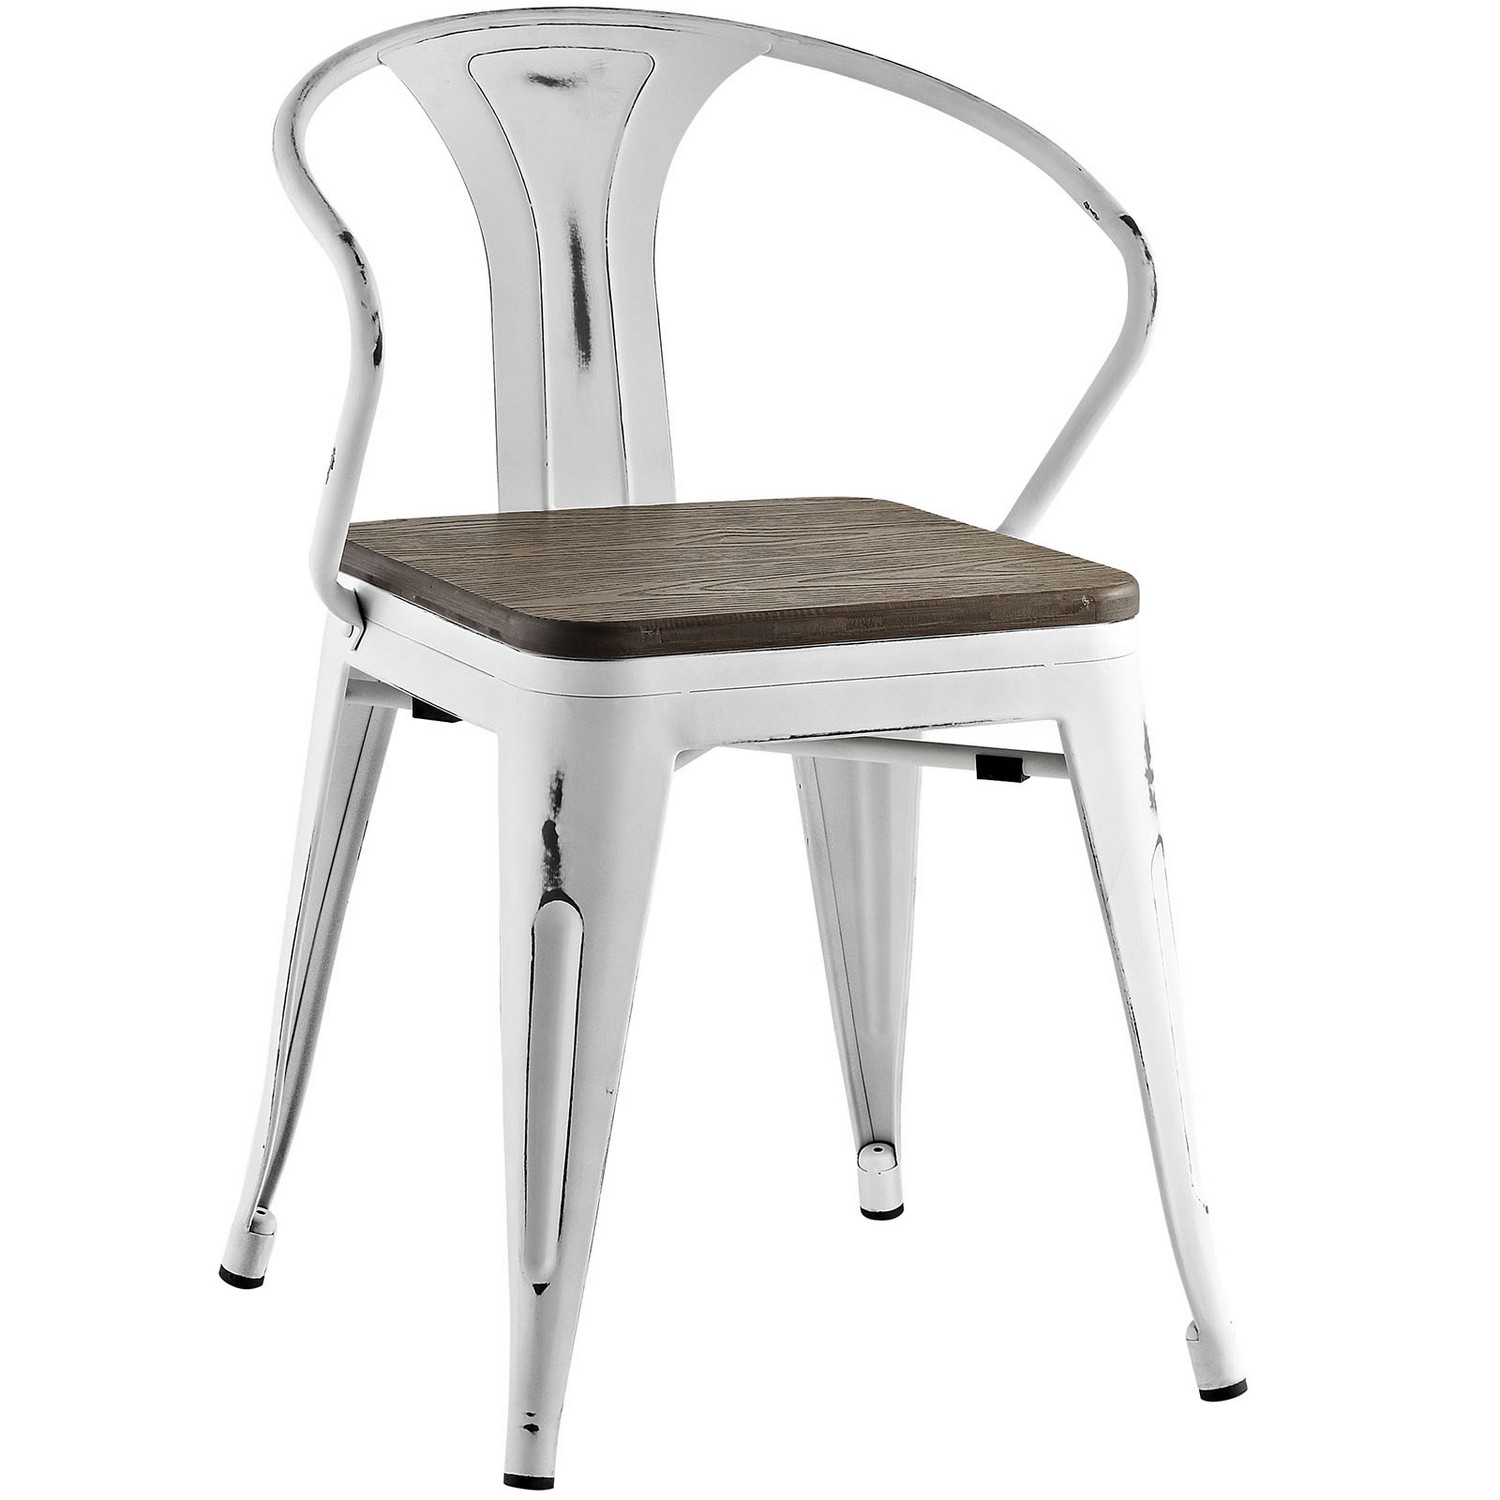 Modway Promenade Dining Chair with Bamboo Seat - White